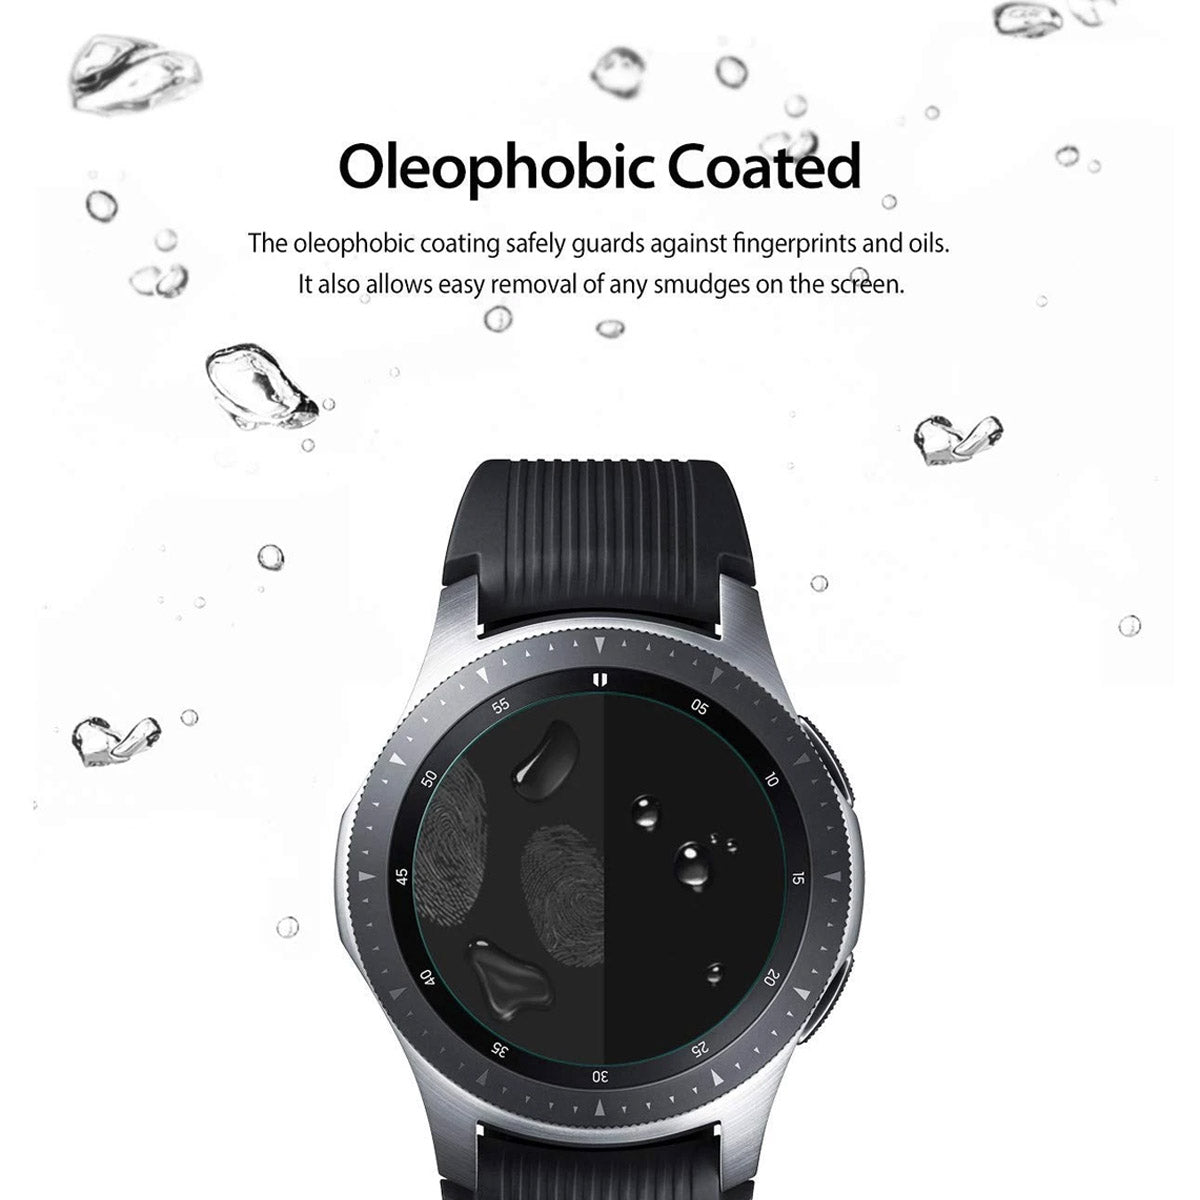 Shop and buy Ringke Tempered Glass Screen Protector for 46mm Samsung Galaxy Watch Gear S3 (2017)| Casefactorie® online with great deals and sales prices with fast and safe shipping. Casefactorie is the largest Singapore official authorised retailer for the largest collection of mobile premium accessories.